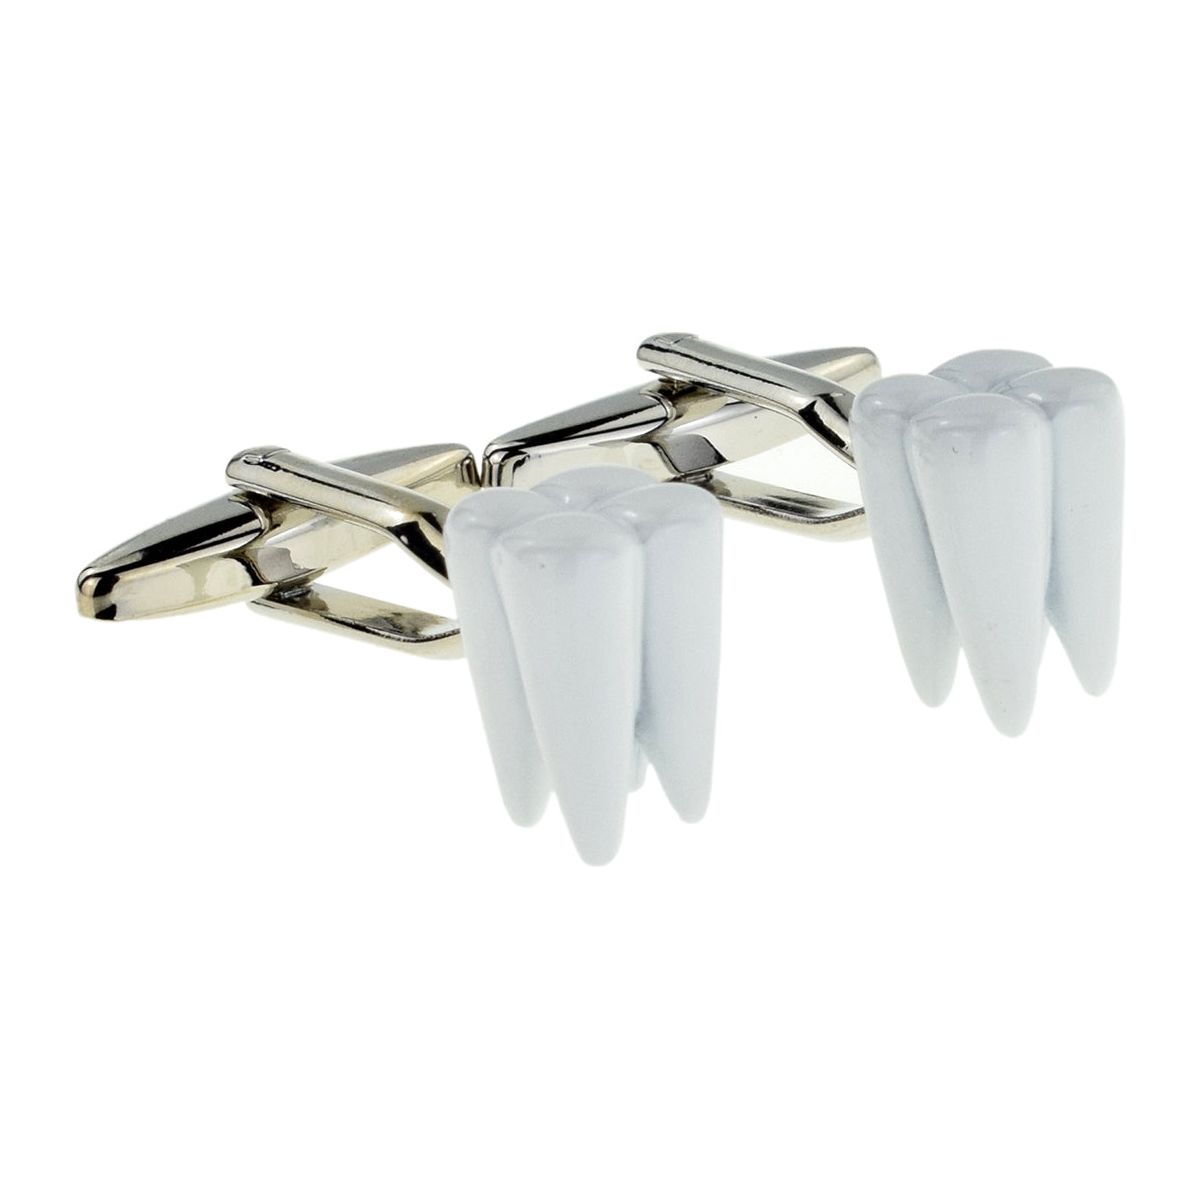 Extracted Teeth Cufflinks Ideal for a Dentist - Ashton and Finch